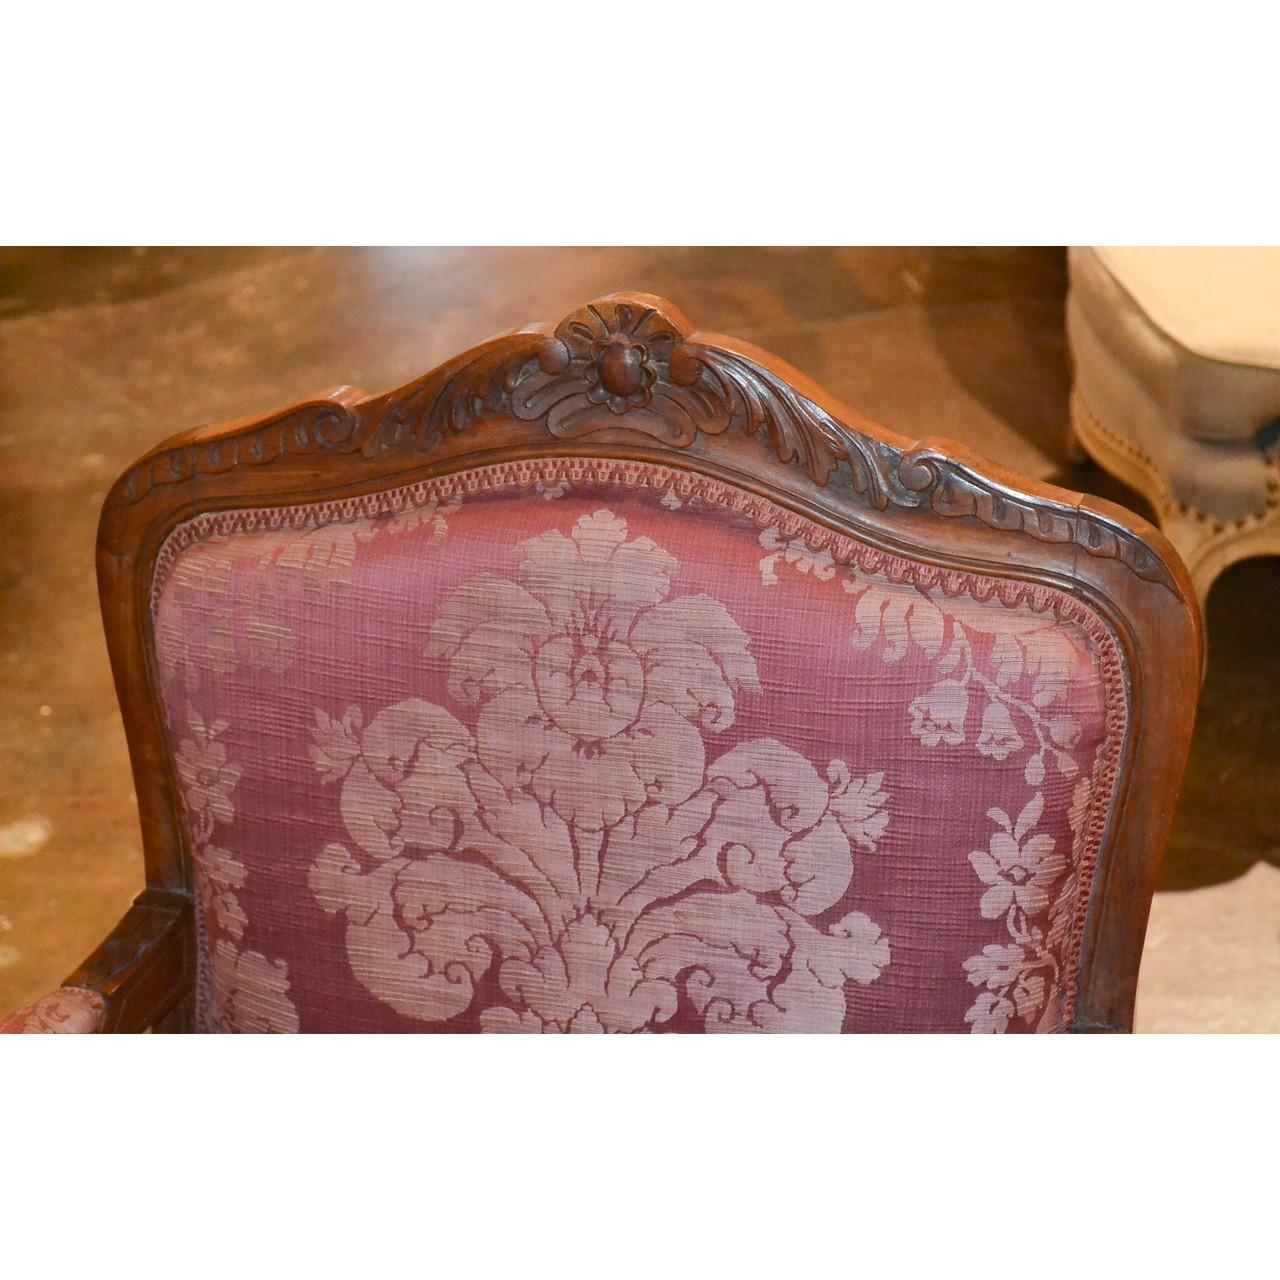 Exquisite set of four 19th century French Louis XV style open armchairs with silk brocade floral motif upholstery. The shaped crest rails beautifully carved with a shell and acanthus leaves. The contoured carved skirts flow smoothly to cabriole legs